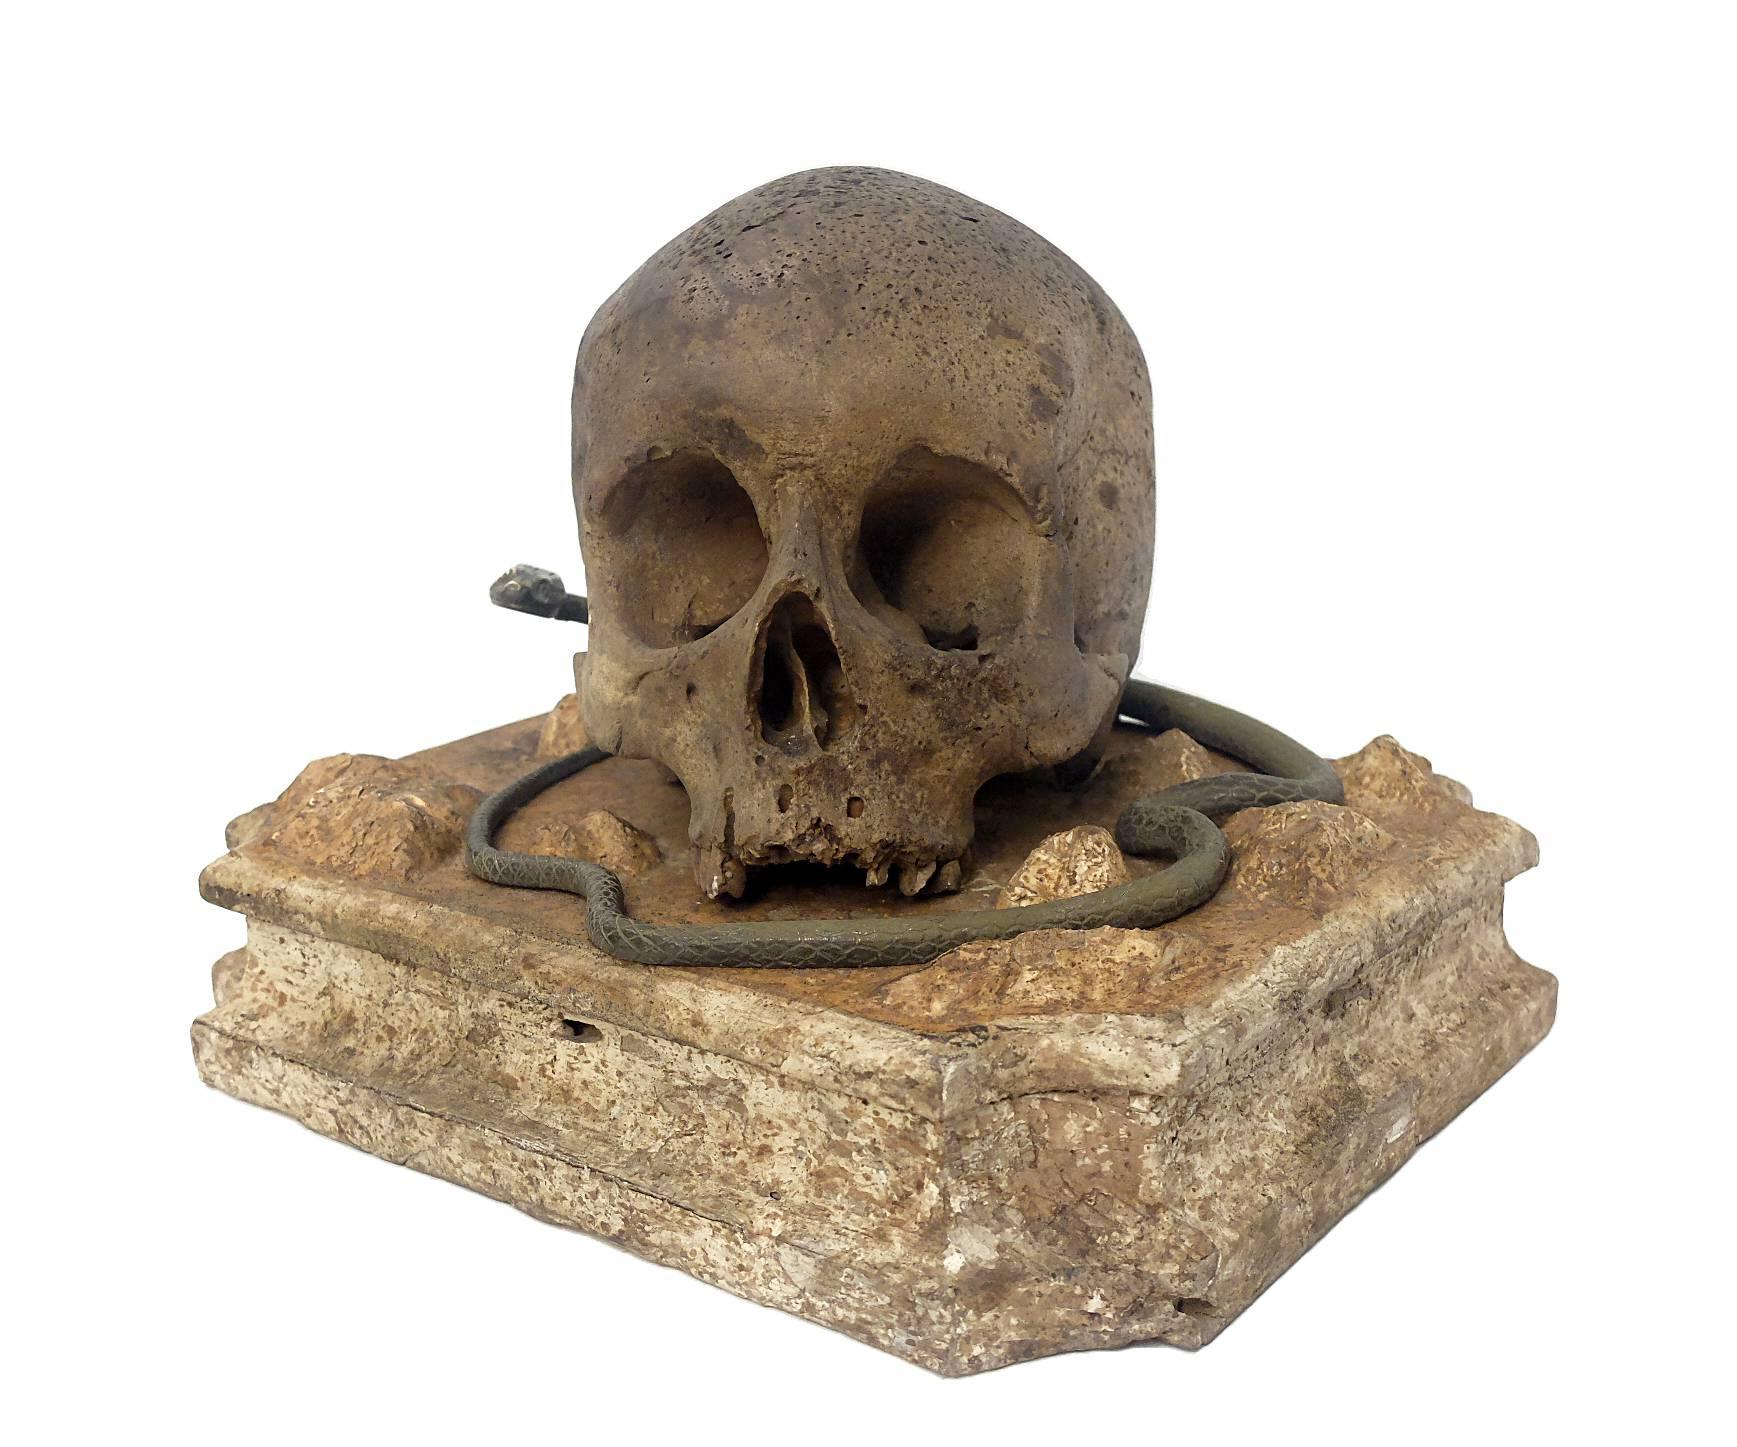 Painted plaster skull over a wooden painted base emulating marble. The skull is surrounded by a bronze snake. Excellent Memento Mori, Italy, circa 1880.